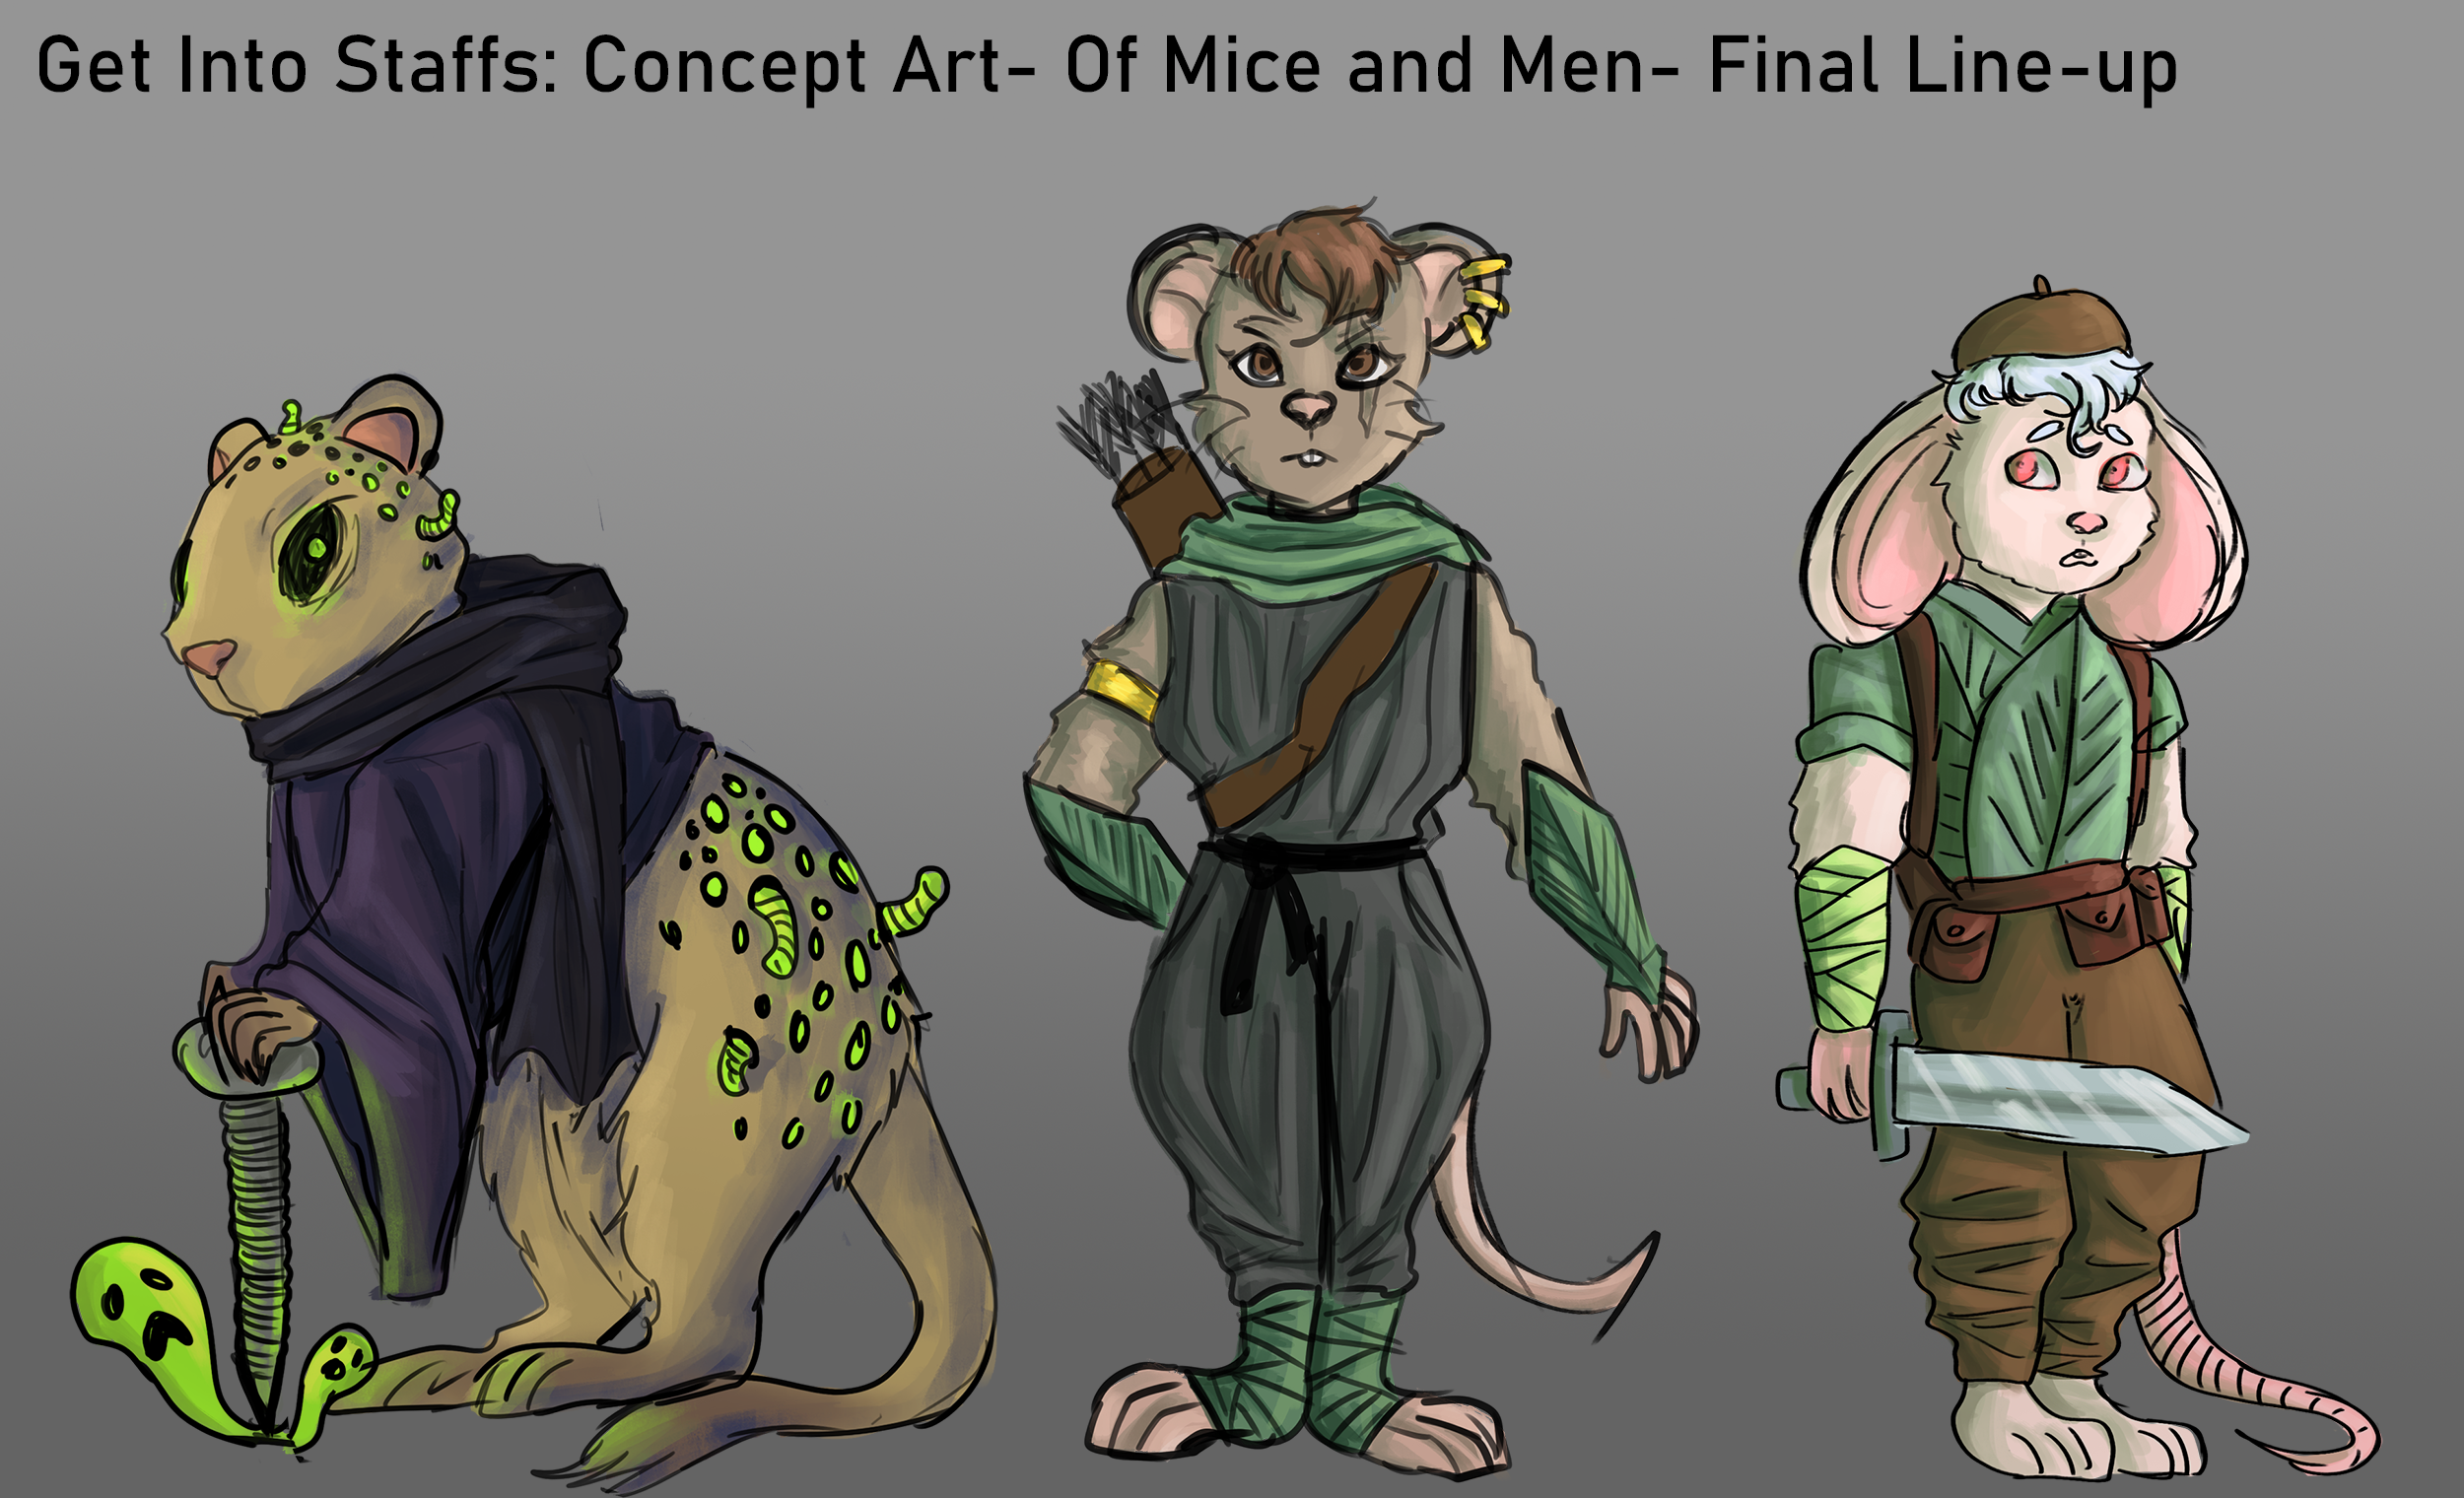 Get Into Staffs: Concept Art (Of Mice and Men)